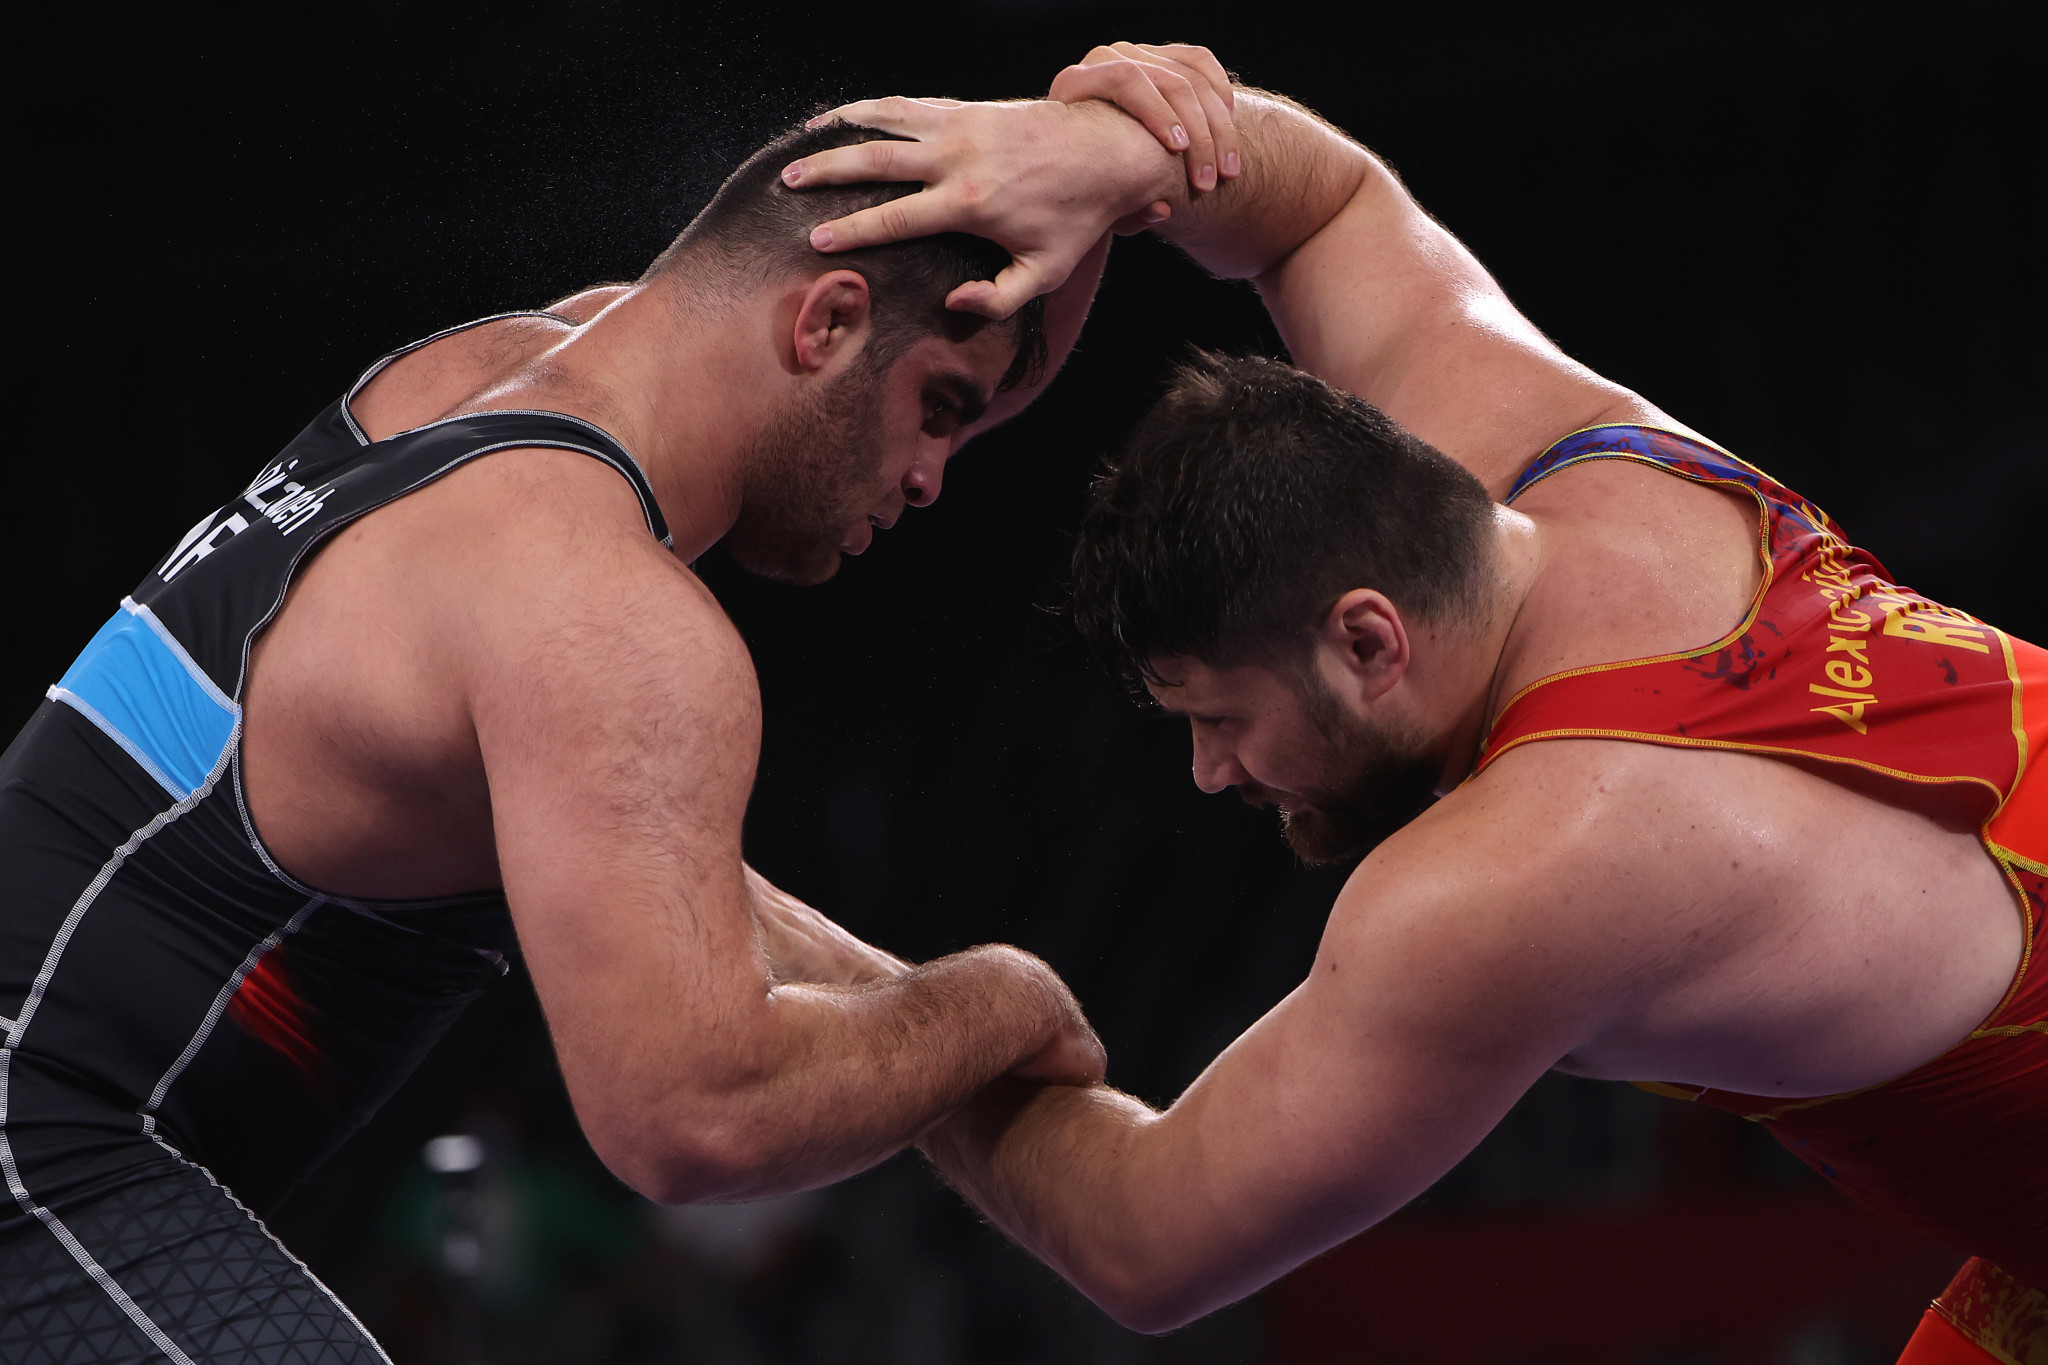 First finalists decided at Under-23 World Wrestling Championships